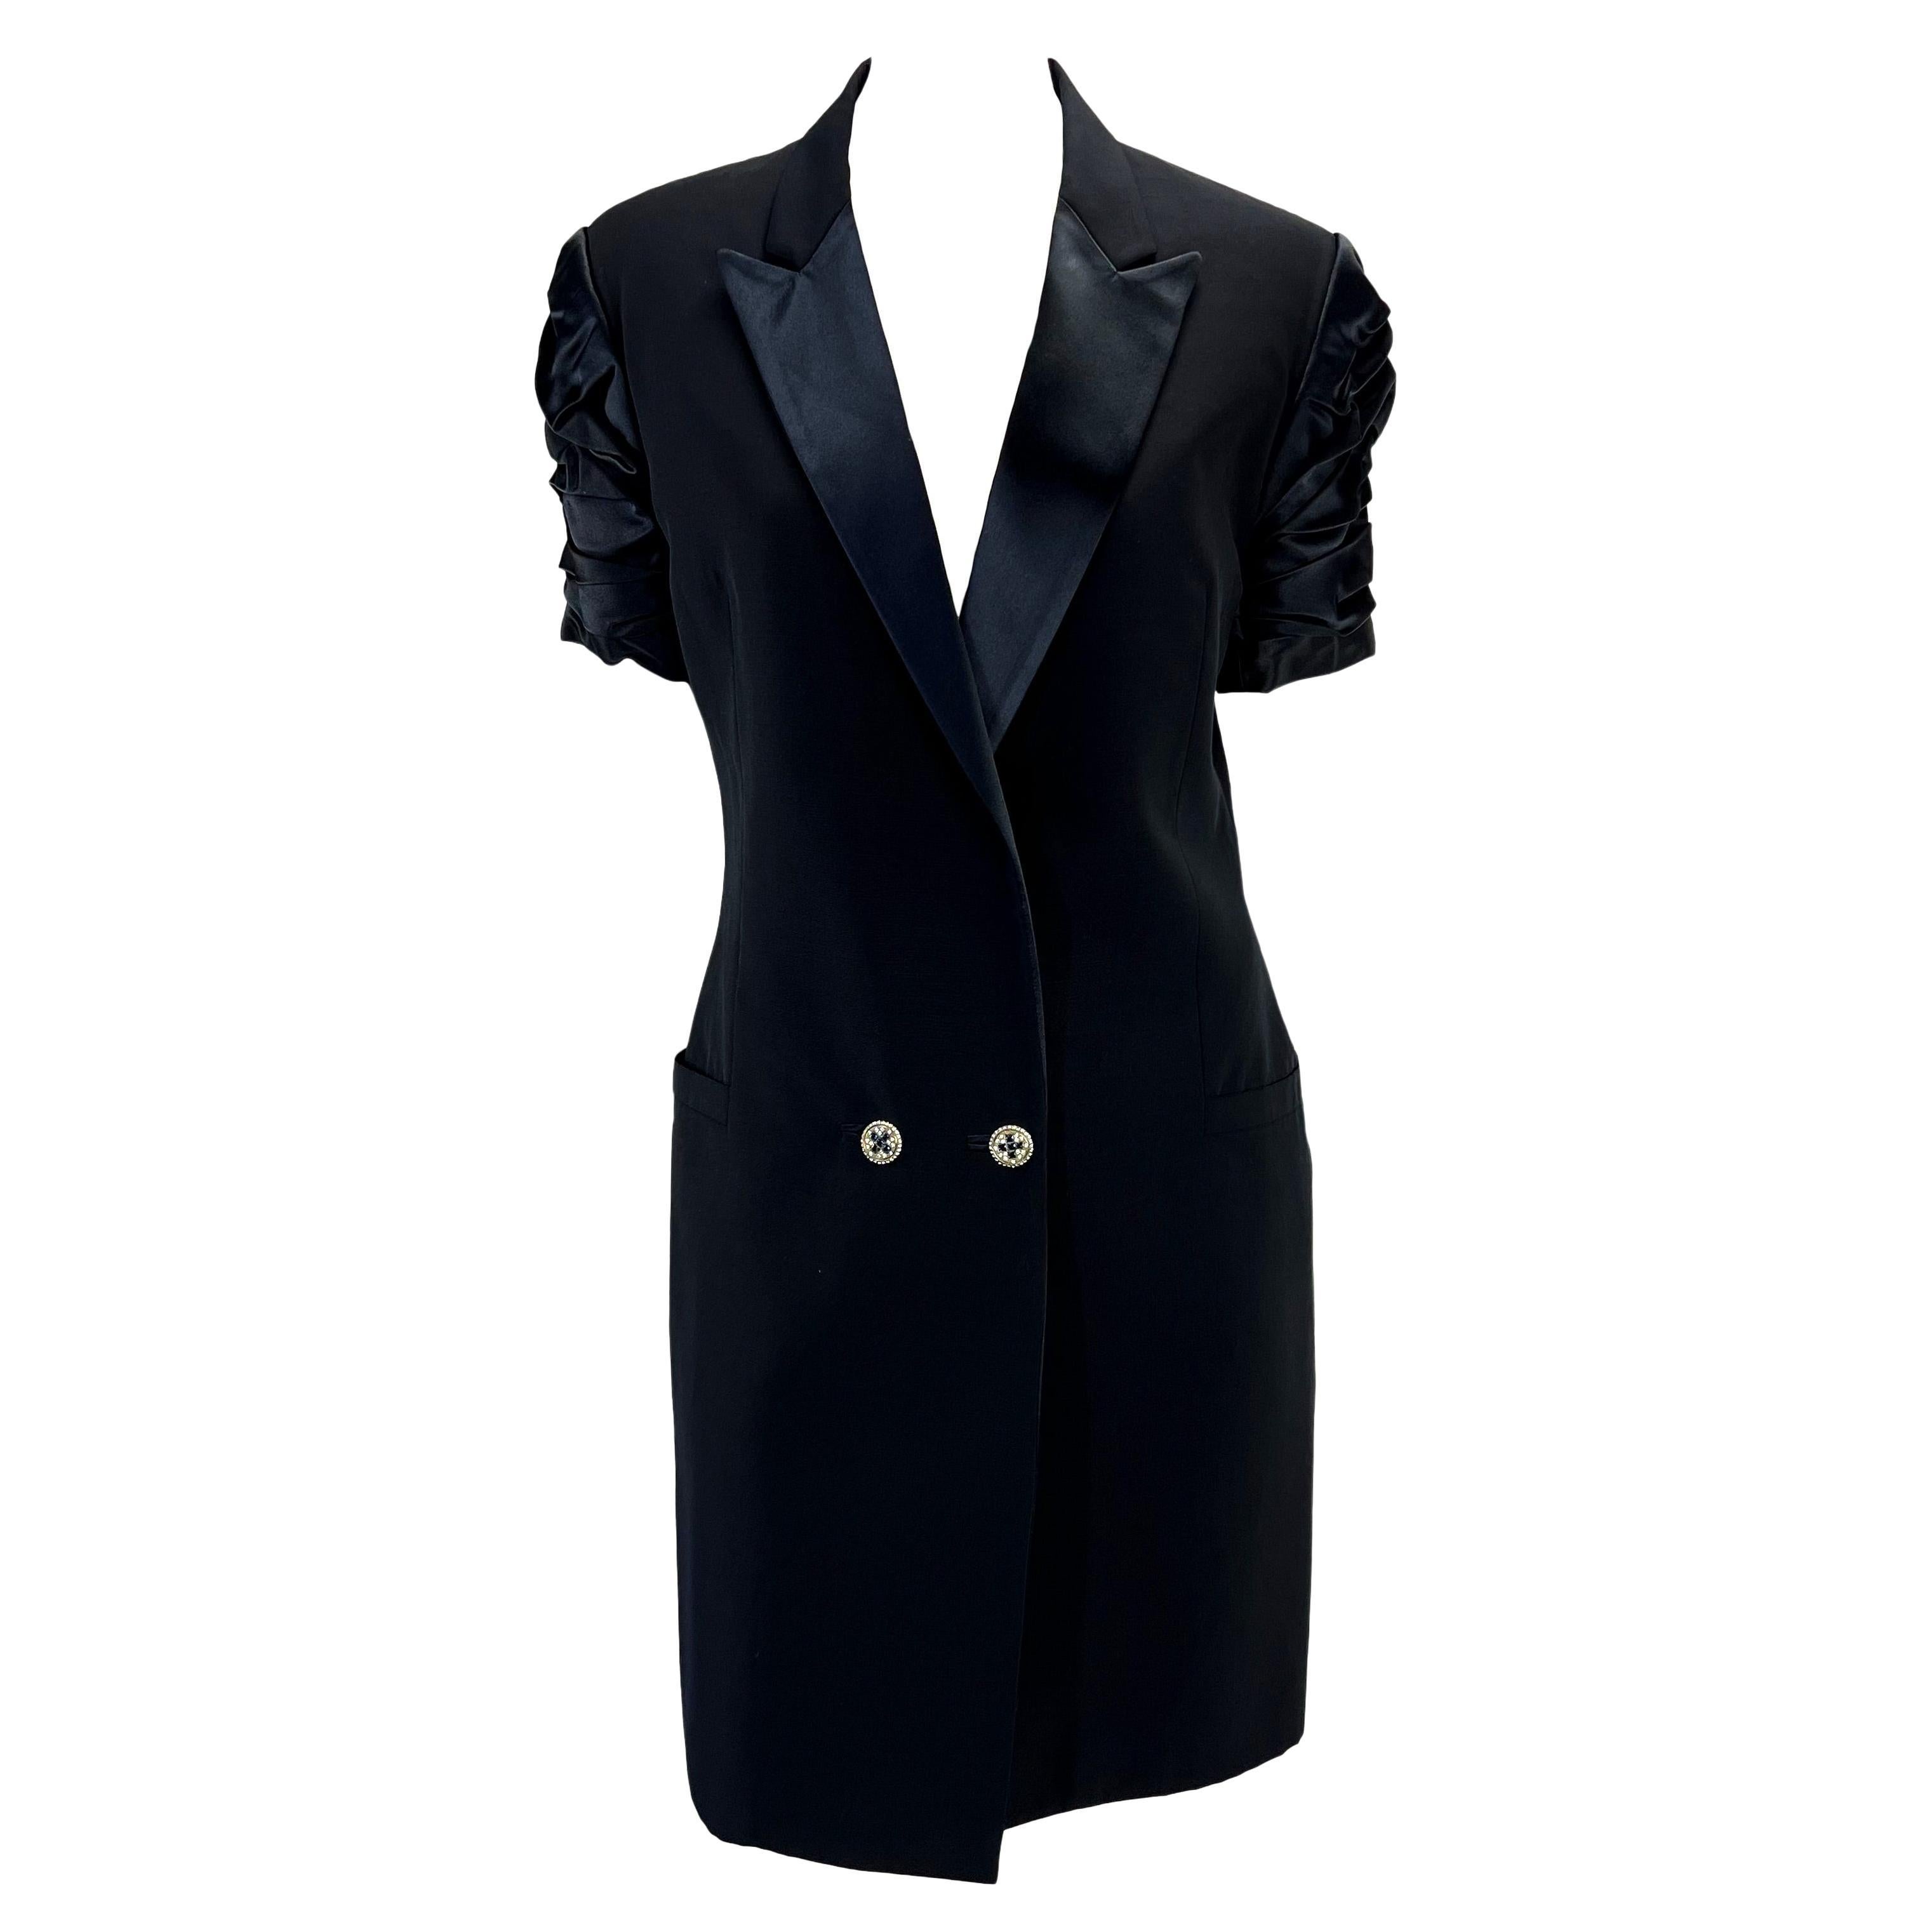 S/S 1990 Gianni Versace Couture Rhinestone Tuxedo Navy Ruched Blazer Dress For Sale